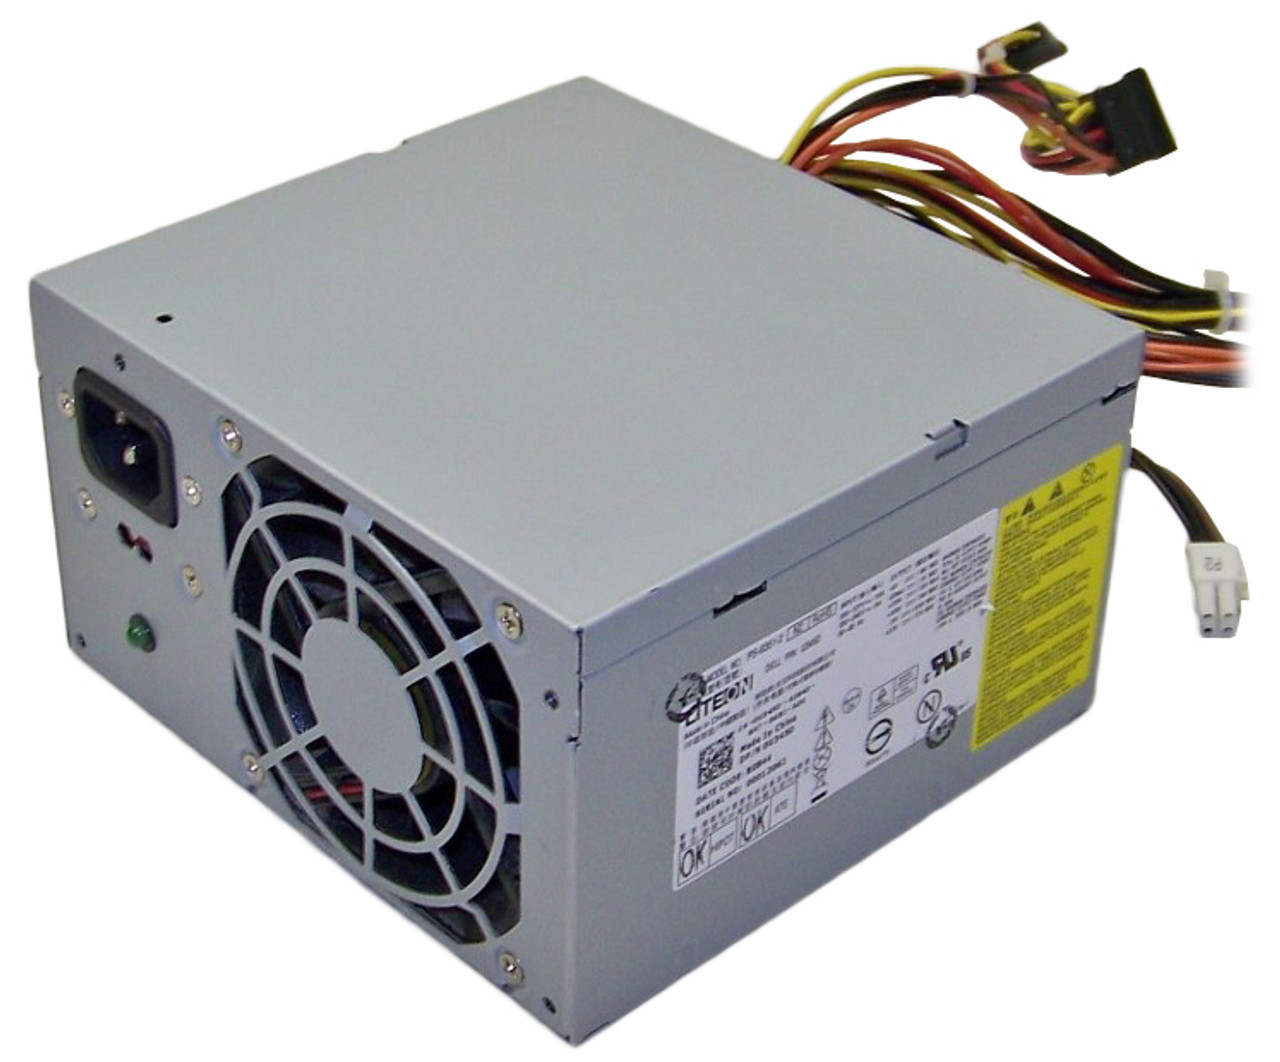 RPSN196 Dell Powerconnect Power Supply